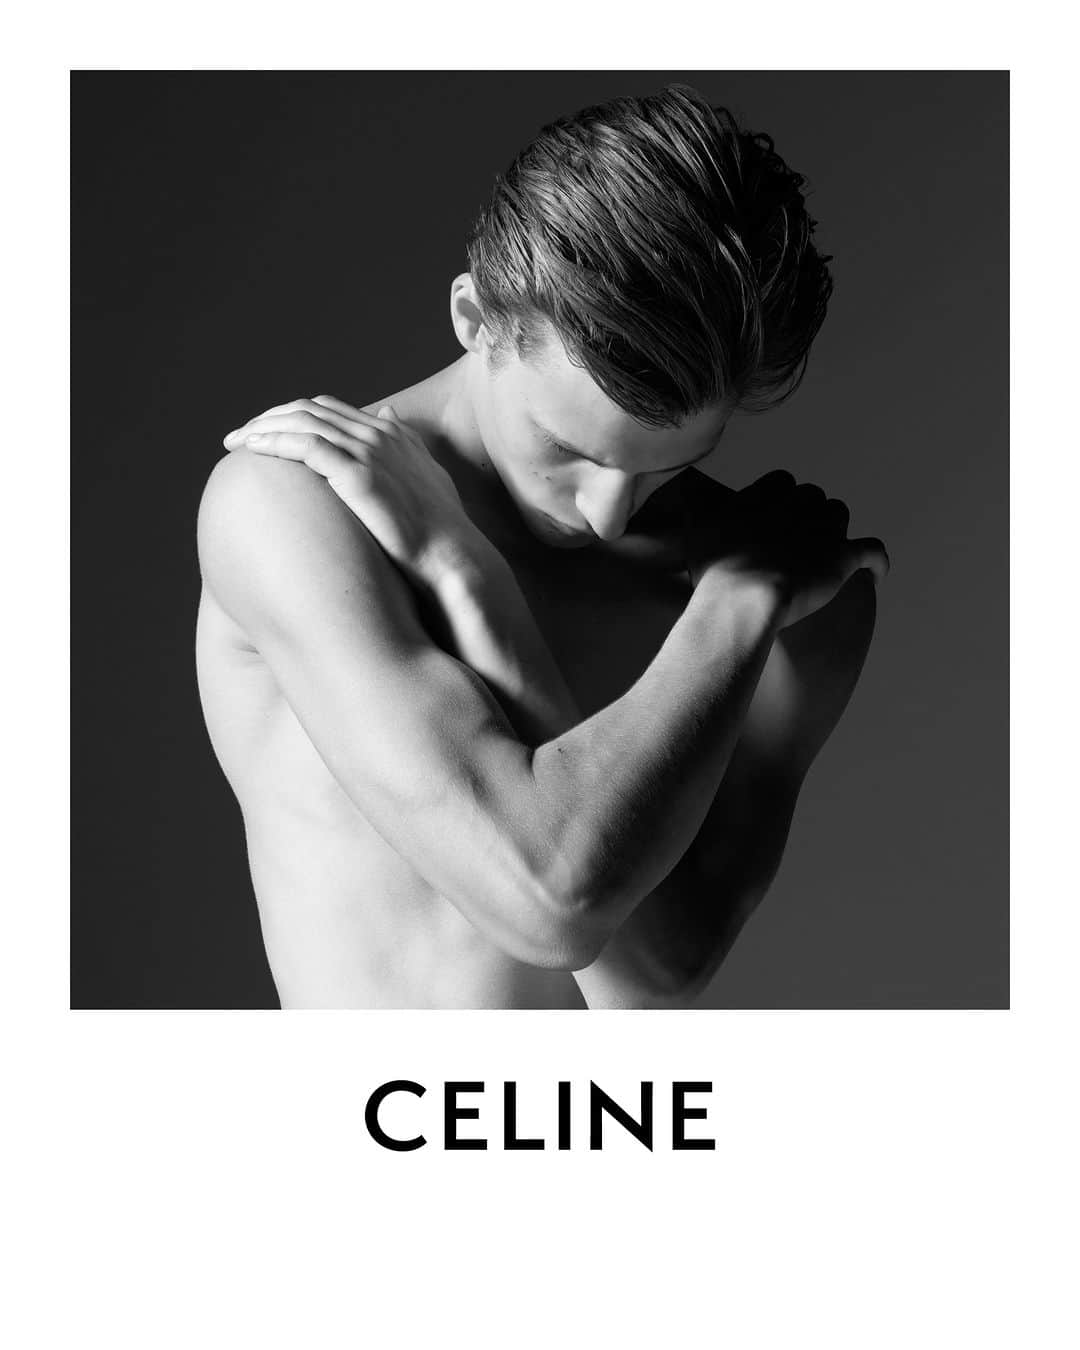 Celineのインスタグラム：「CELINE 20 HOMME SUMMER 24  DELUSIONAL DAYDREAM  SCENES WERE FILMED AT THE MONTE-CARLO OPERA GARNIER FEATURING CLASSICAL BALLET DANCER LAURIDS SEIDEL.   LAURIDS SEIDEL @HEDISLIMANE PHOTOGRAPHY AND STYLING MONTE-CARLO OPERA GARNIER, MONACO JULY 2023  #CELINEBYHEDISLIMANE」